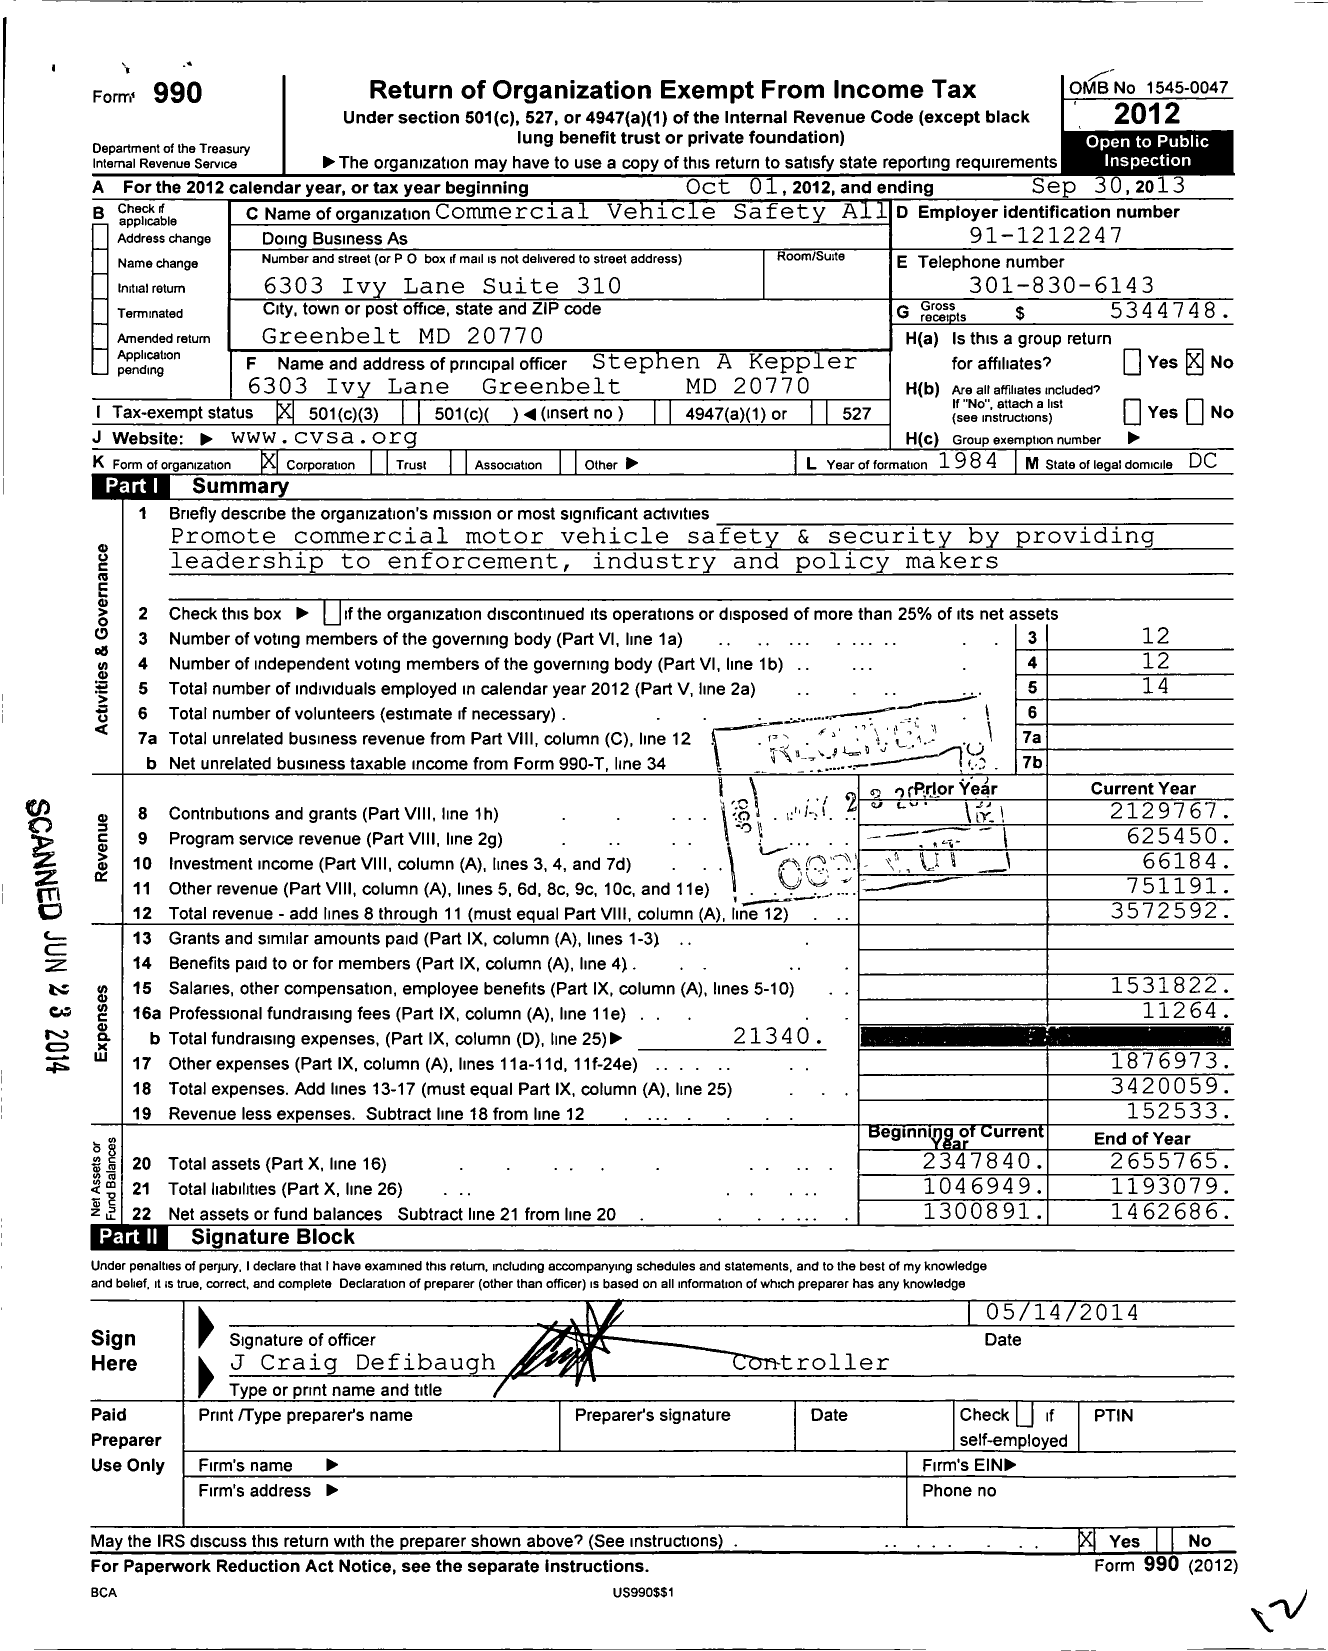 Image of first page of 2012 Form 990 for Commercial Vehicle Safety All